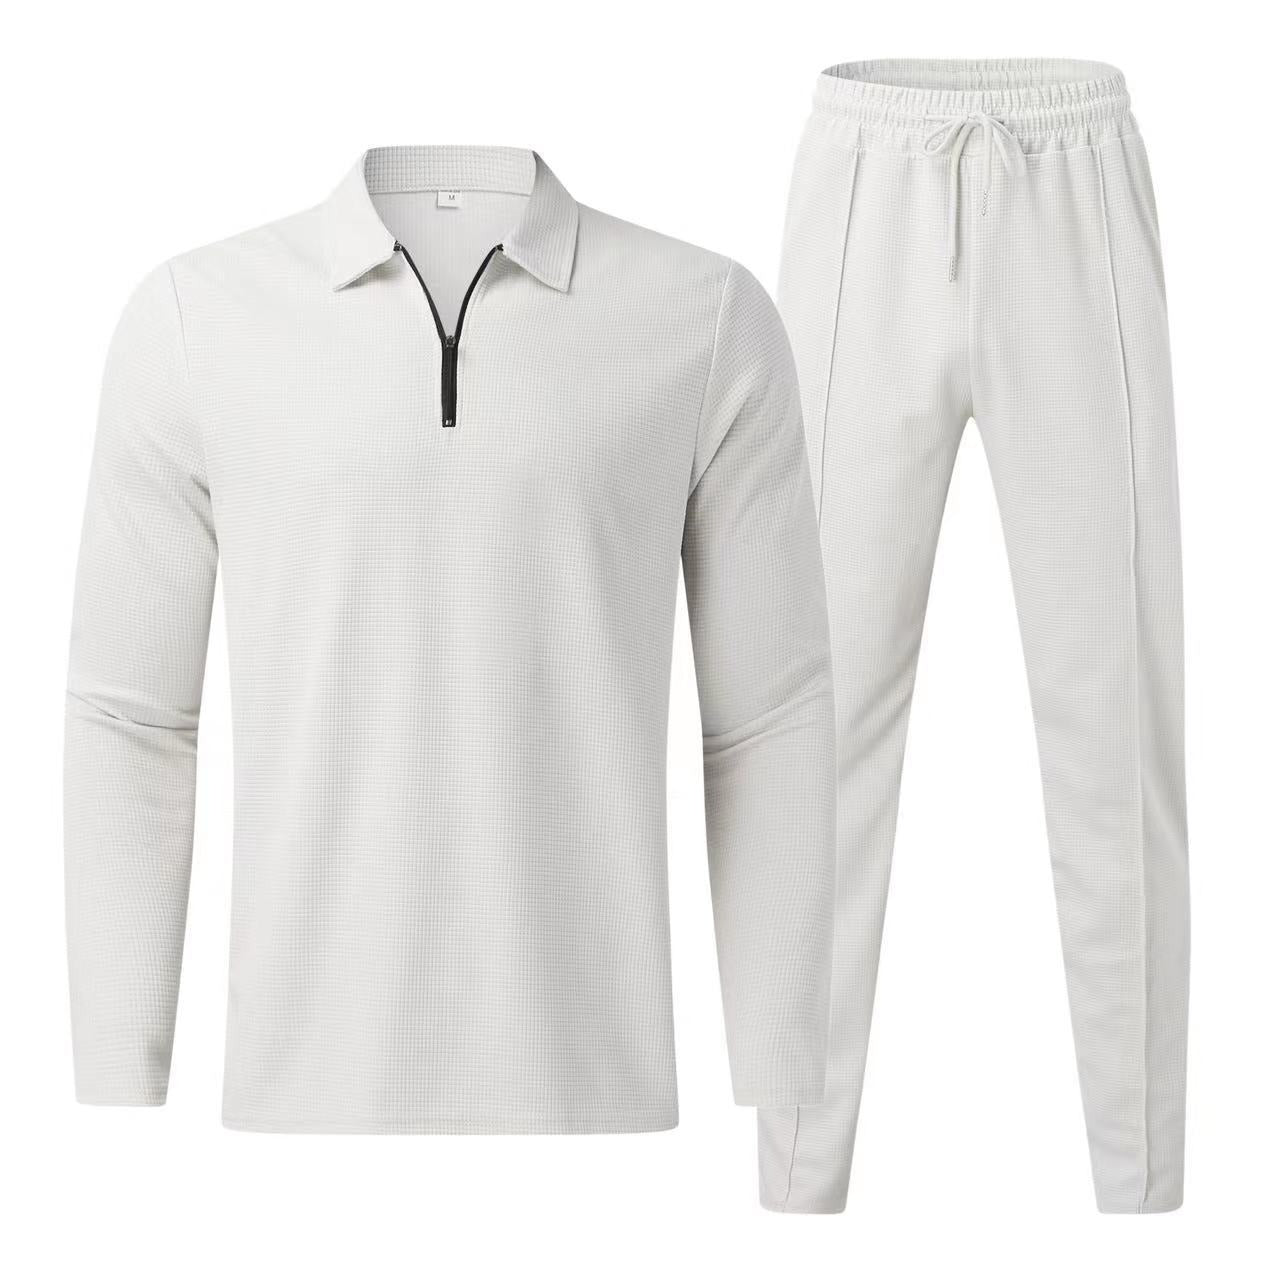 Men's casual sports suit with sleeves and long pants